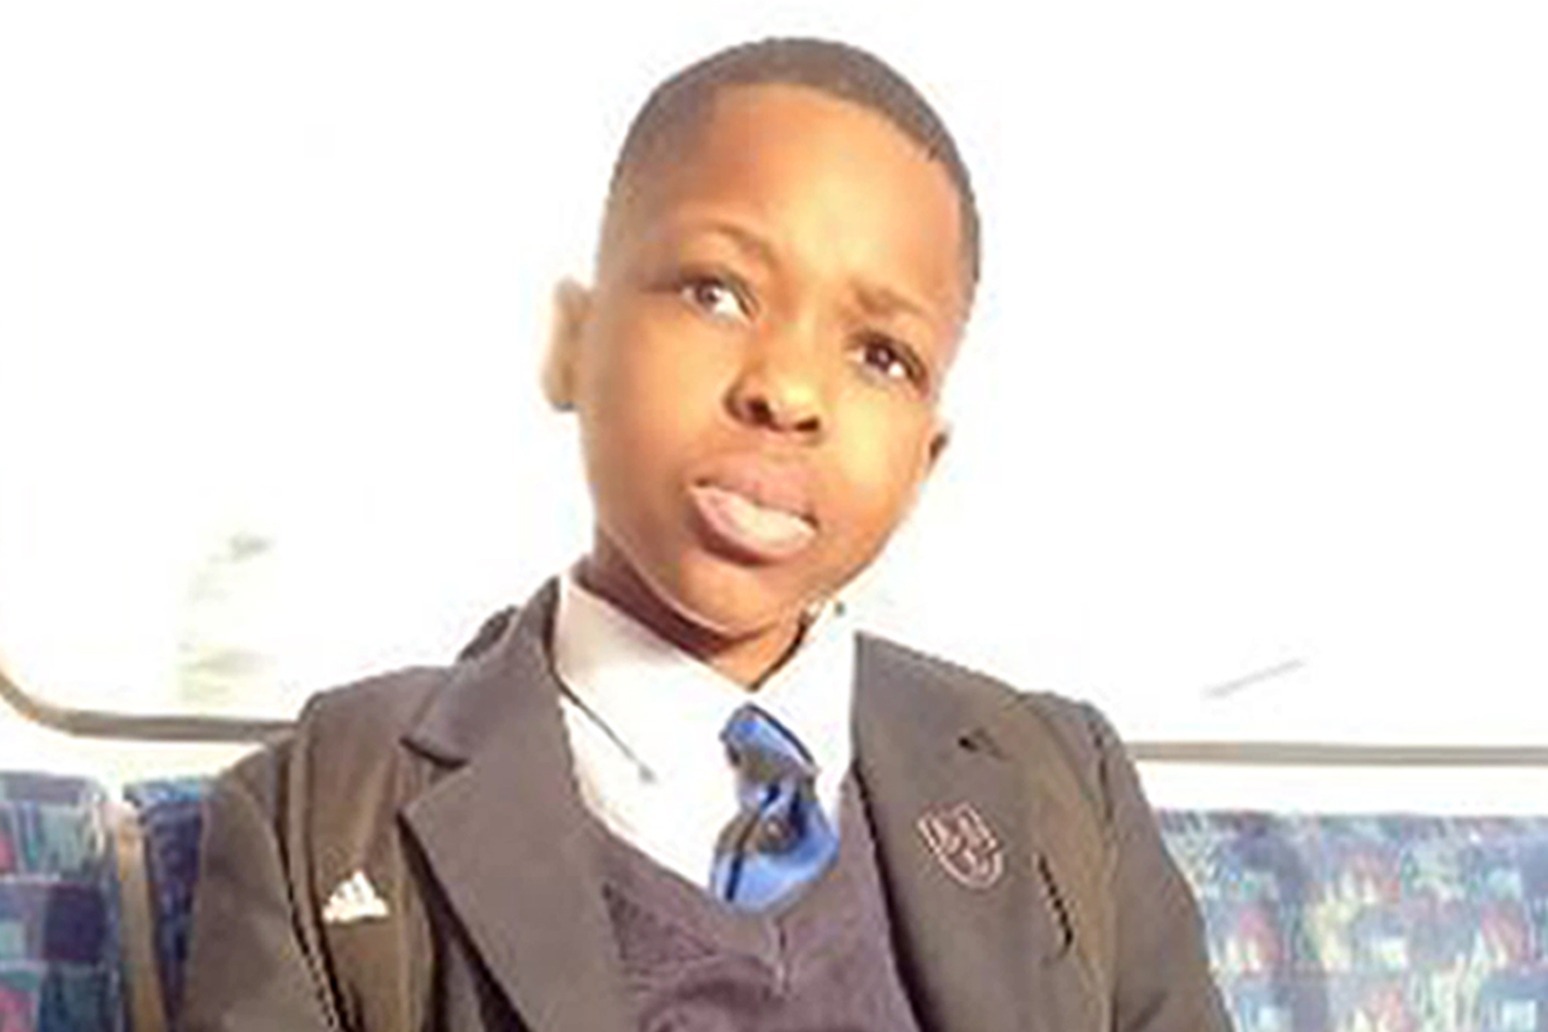 Tributes paid to 14 year old boy killed in east London